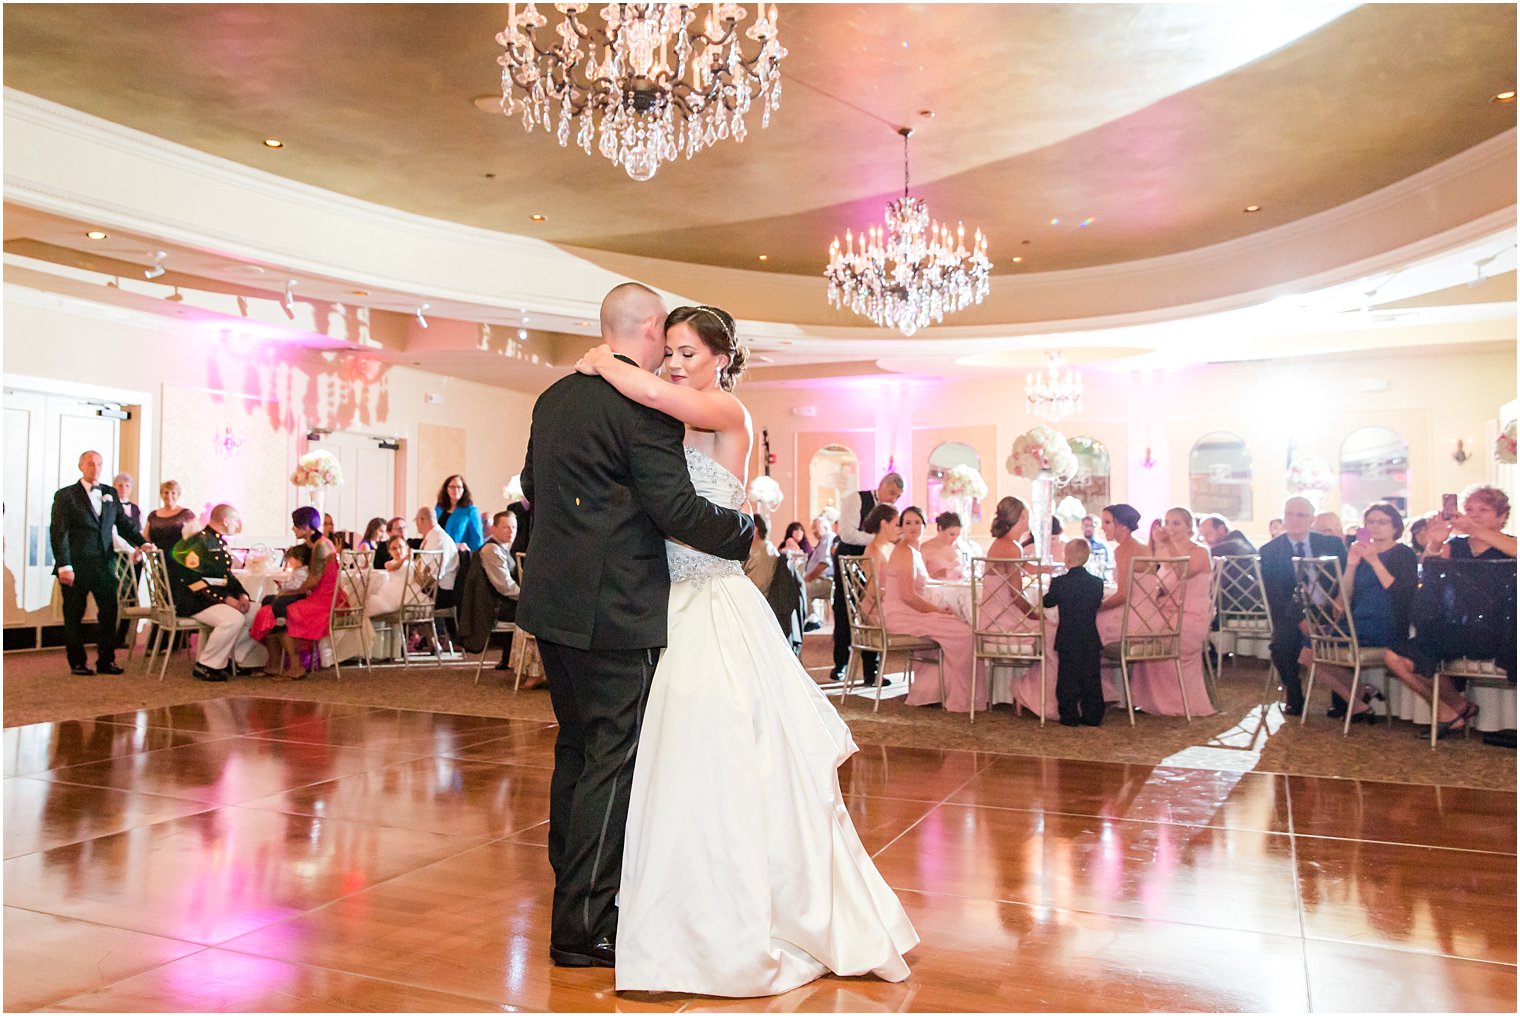 First dance by bride and groom